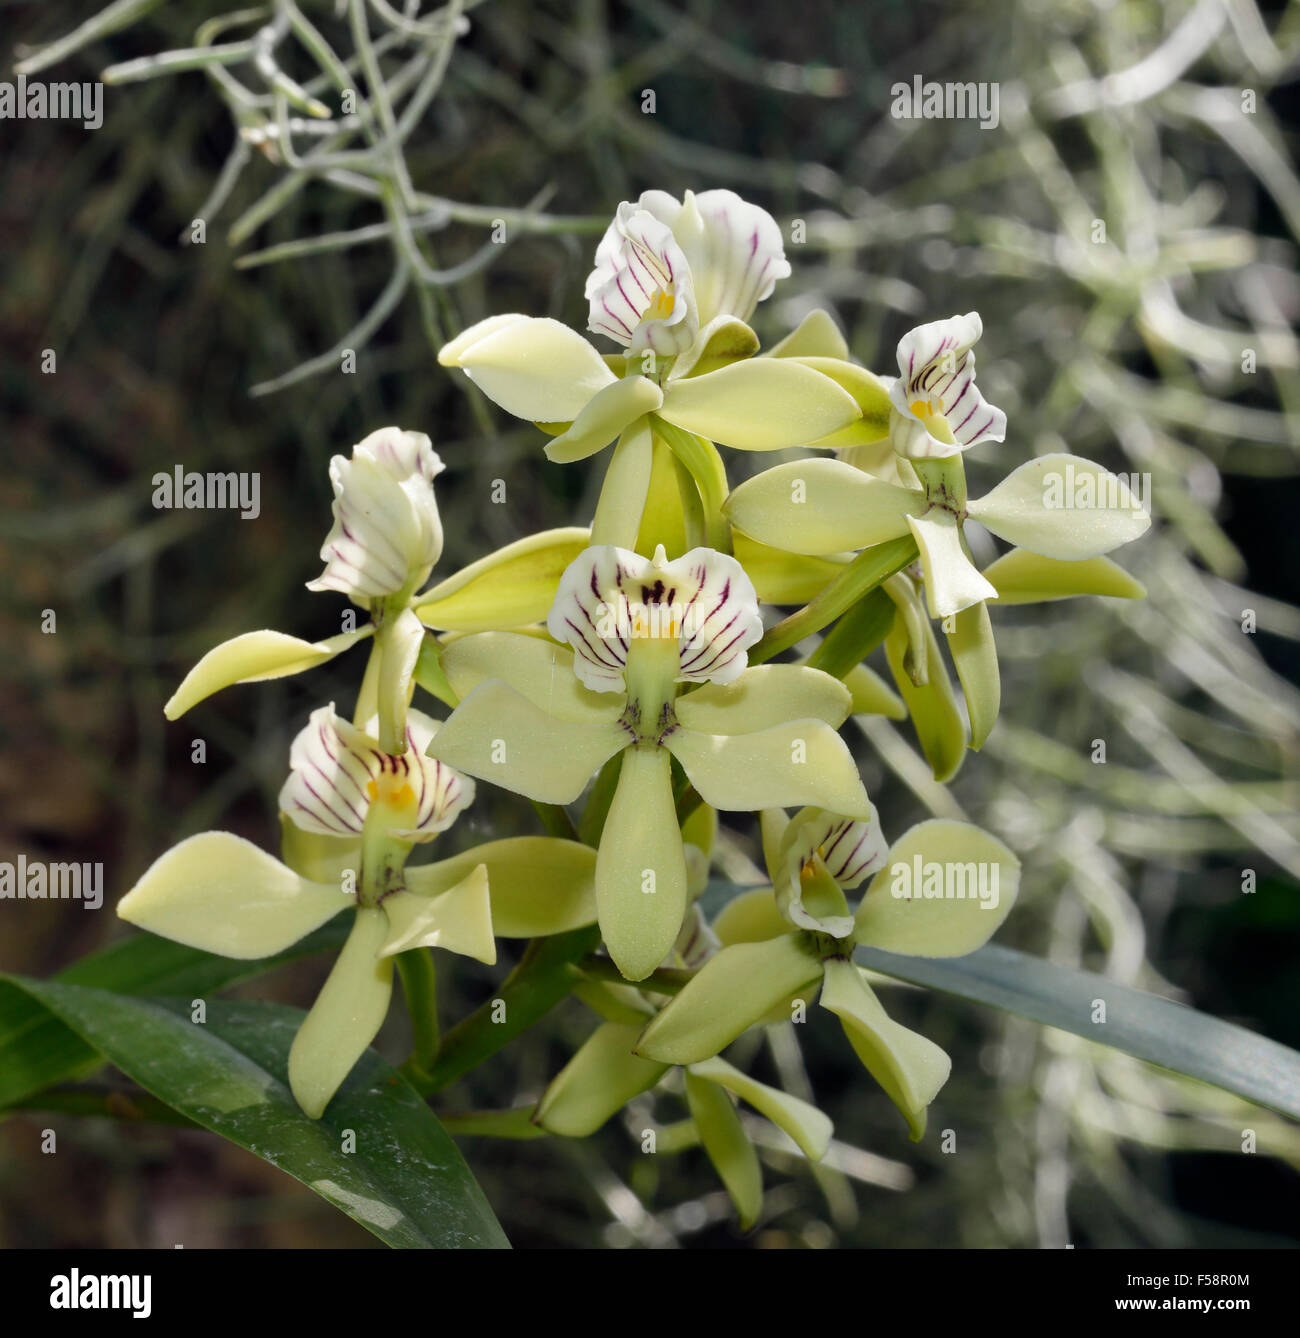 Lined Petal Prosthechea Orchid - Prosthechea radiata From Central America Stock Photo